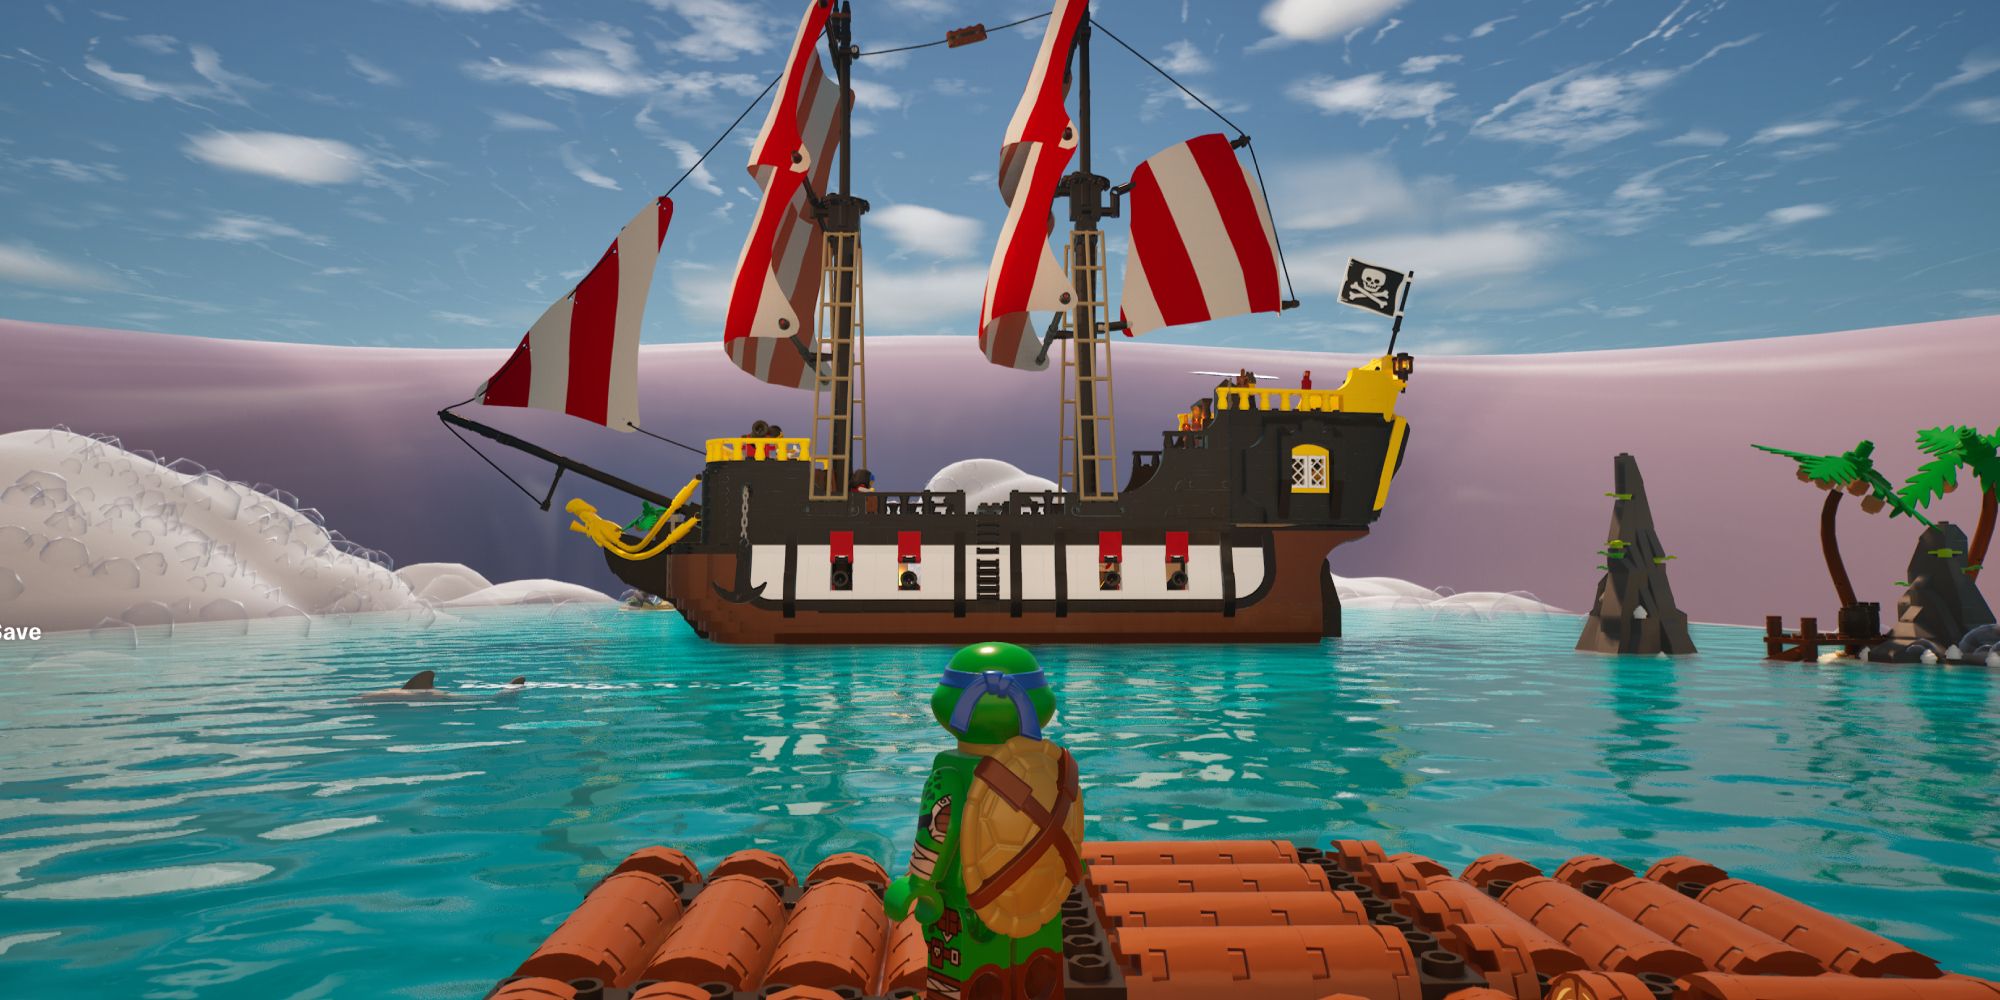 Standing on the raft facing the pirate ship waiting for the first wave of attack in the Lego Fortnite Creative Map Lego Raft Survival